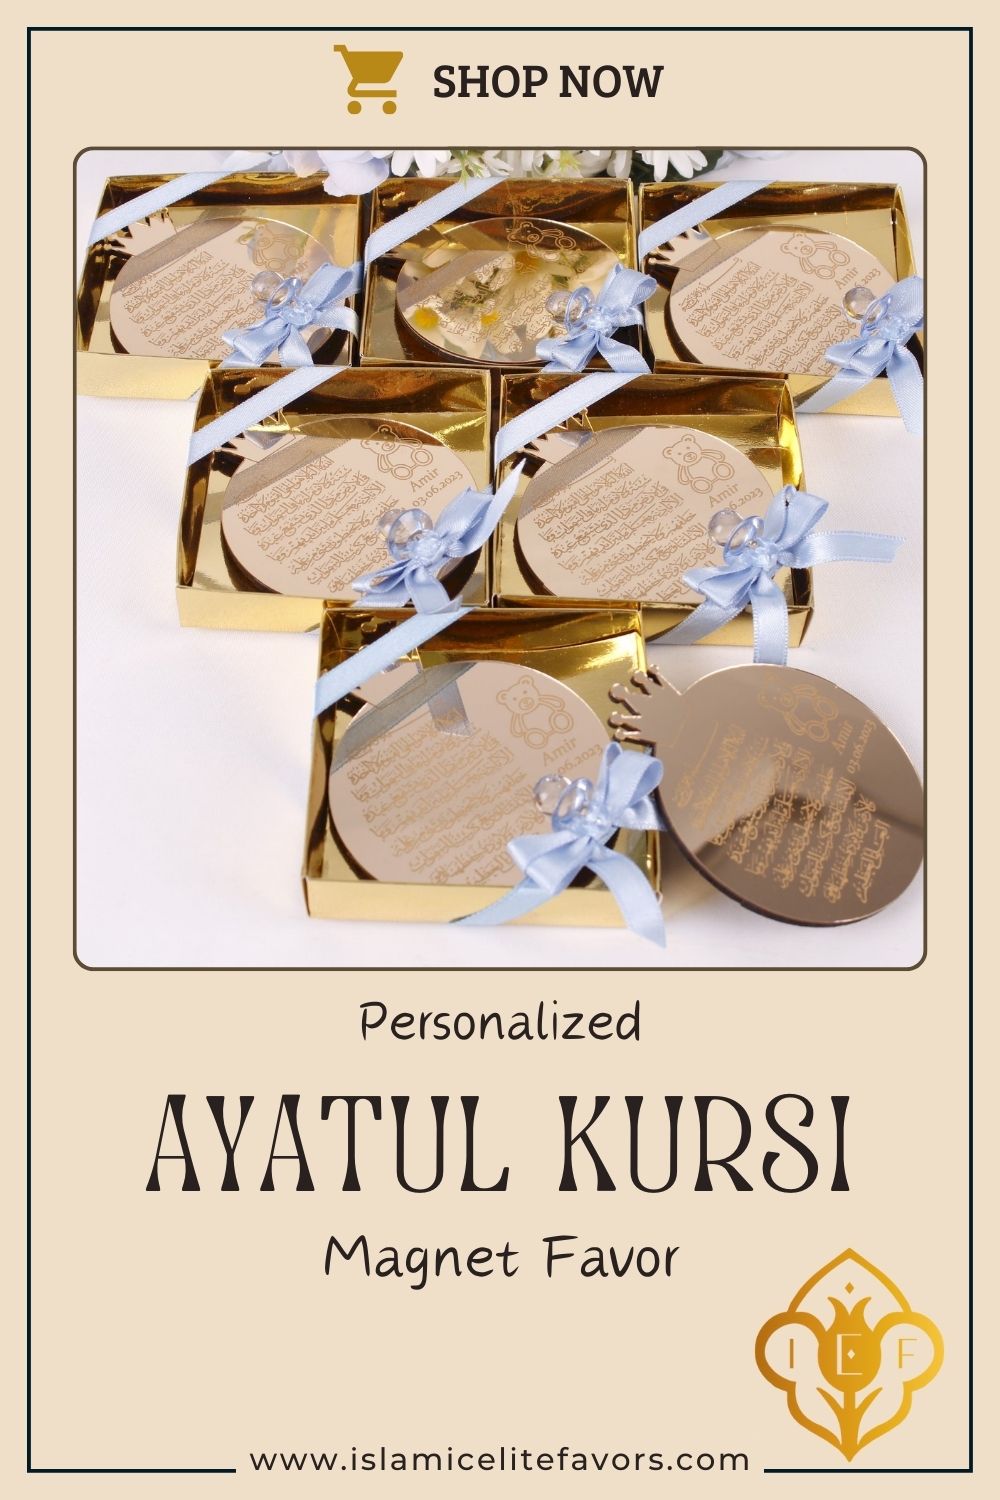 Personalized Ayatul Kursi Baby Shower Magnet Favor for Guest in Bulk - Islamic Elite Favors is a handmade gift shop offering a wide variety of unique and personalized gifts for all occasions. Whether you're looking for the perfect Ramadan, Eid, Hajj, wedding gift or something special for a birthday, baby shower or anniversary, we have something for everyone. High quality, made with love.